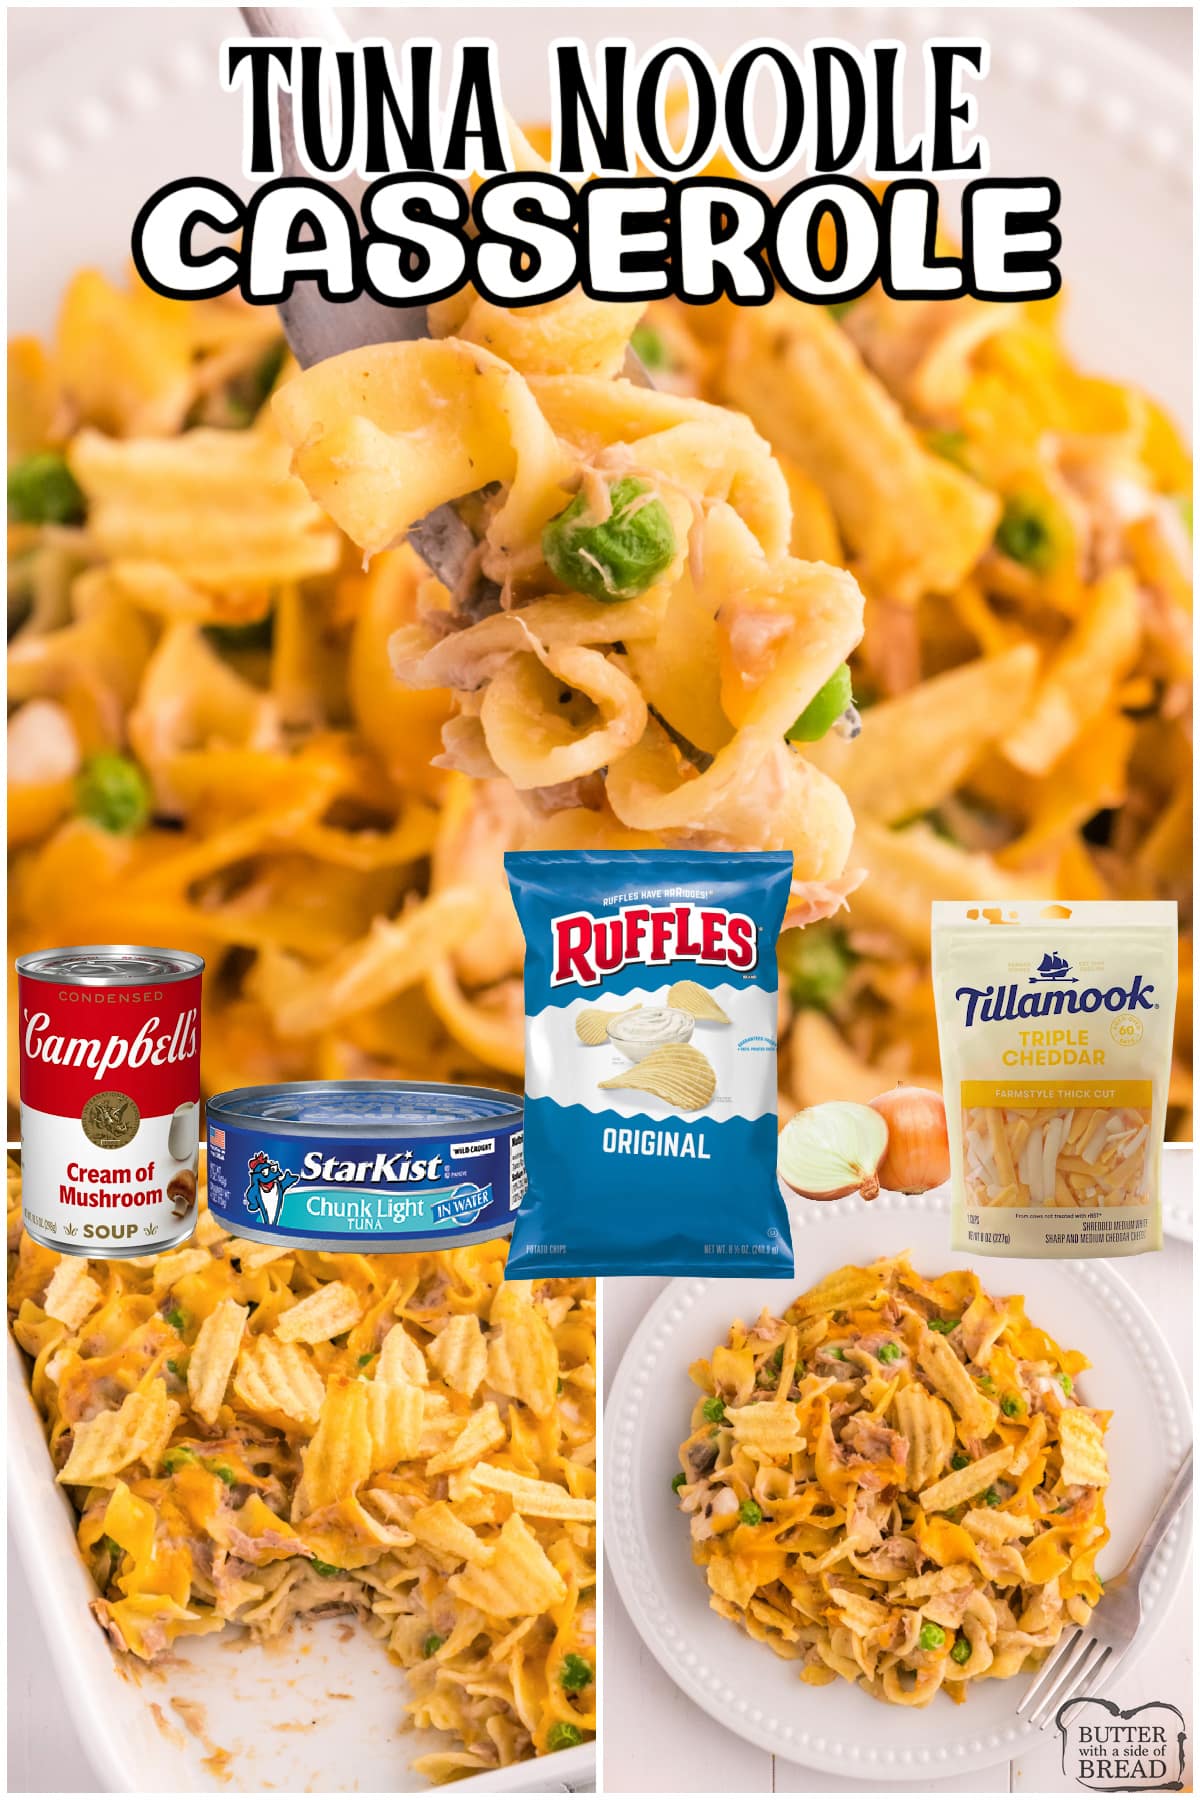 Tuna Noodle Casserole is the perfect comfort food recipe for a weekday dinner. This tuna casserole recipe is topped with cheese and crushed potato chips.